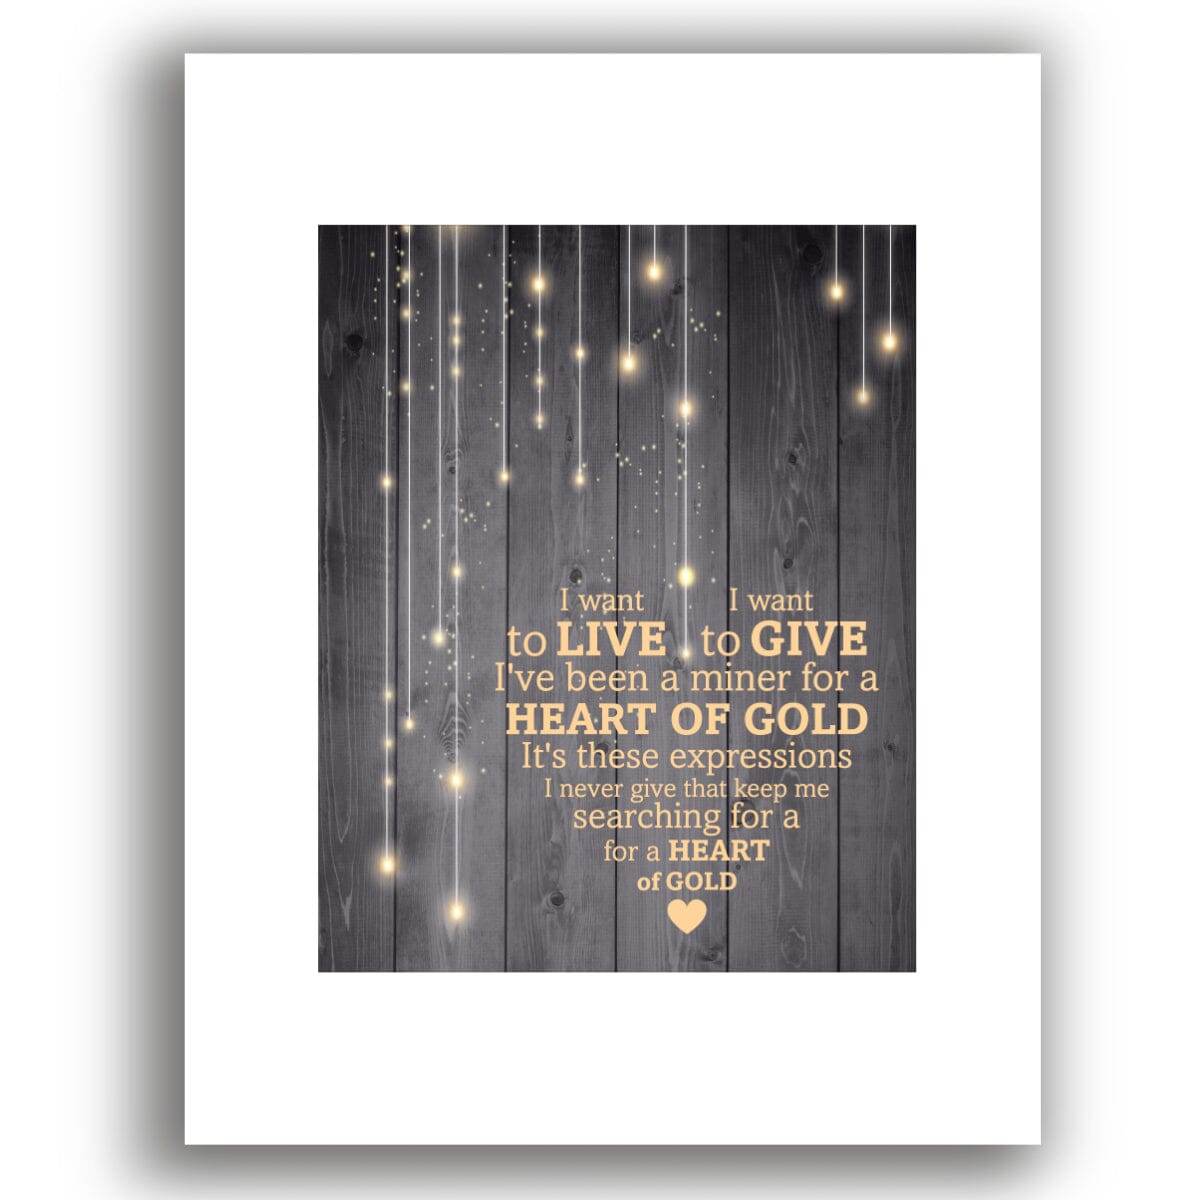 Heart of Gold by Neil Young - Lyric Song Art Wall Print Song Lyrics Art Song Lyrics Art 11x14 White Matted Print 